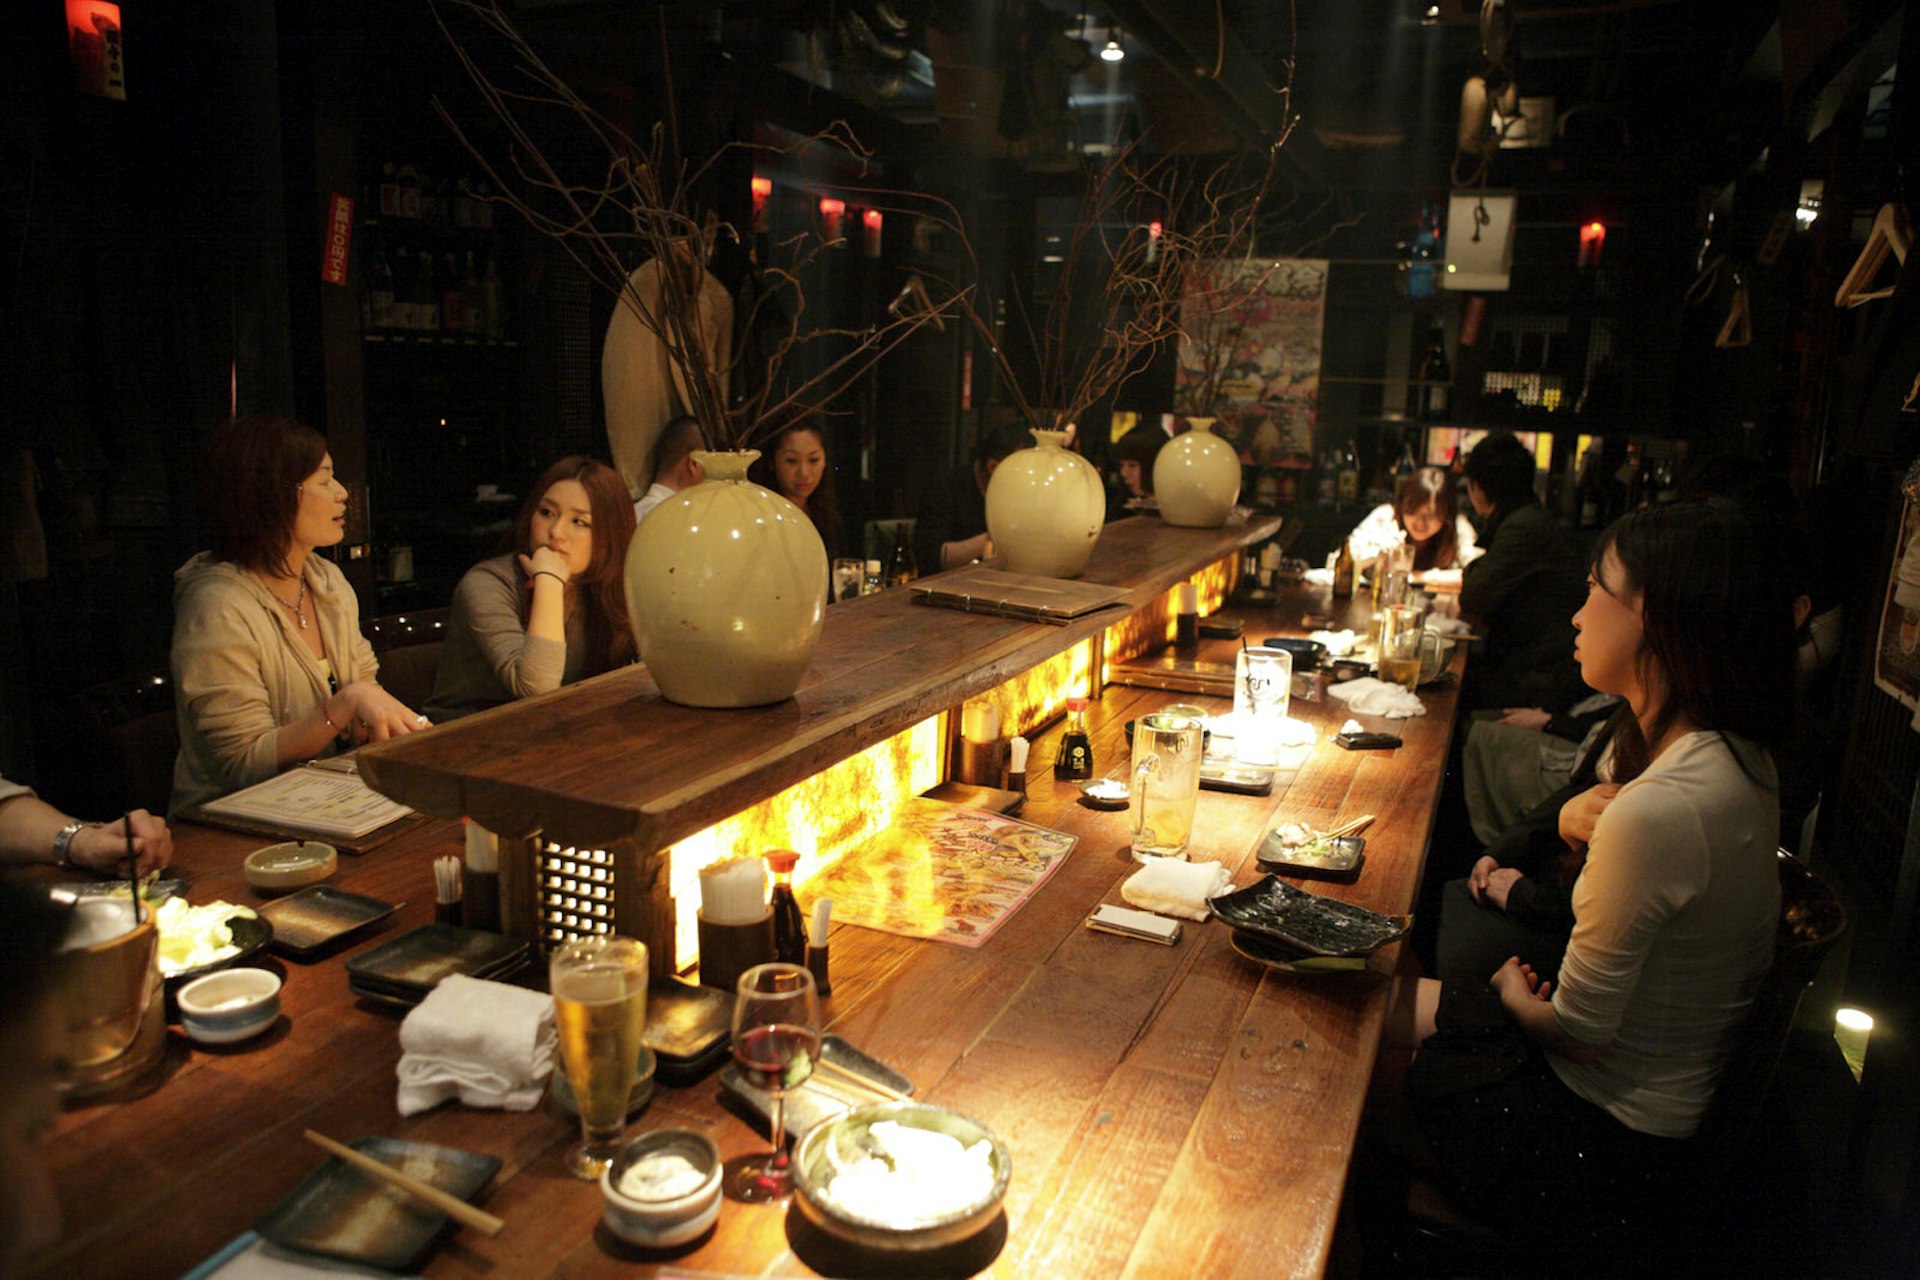 A long wooden table in a downlit Tokyo restaurant, with local diners conversing over pretty ceramic plates